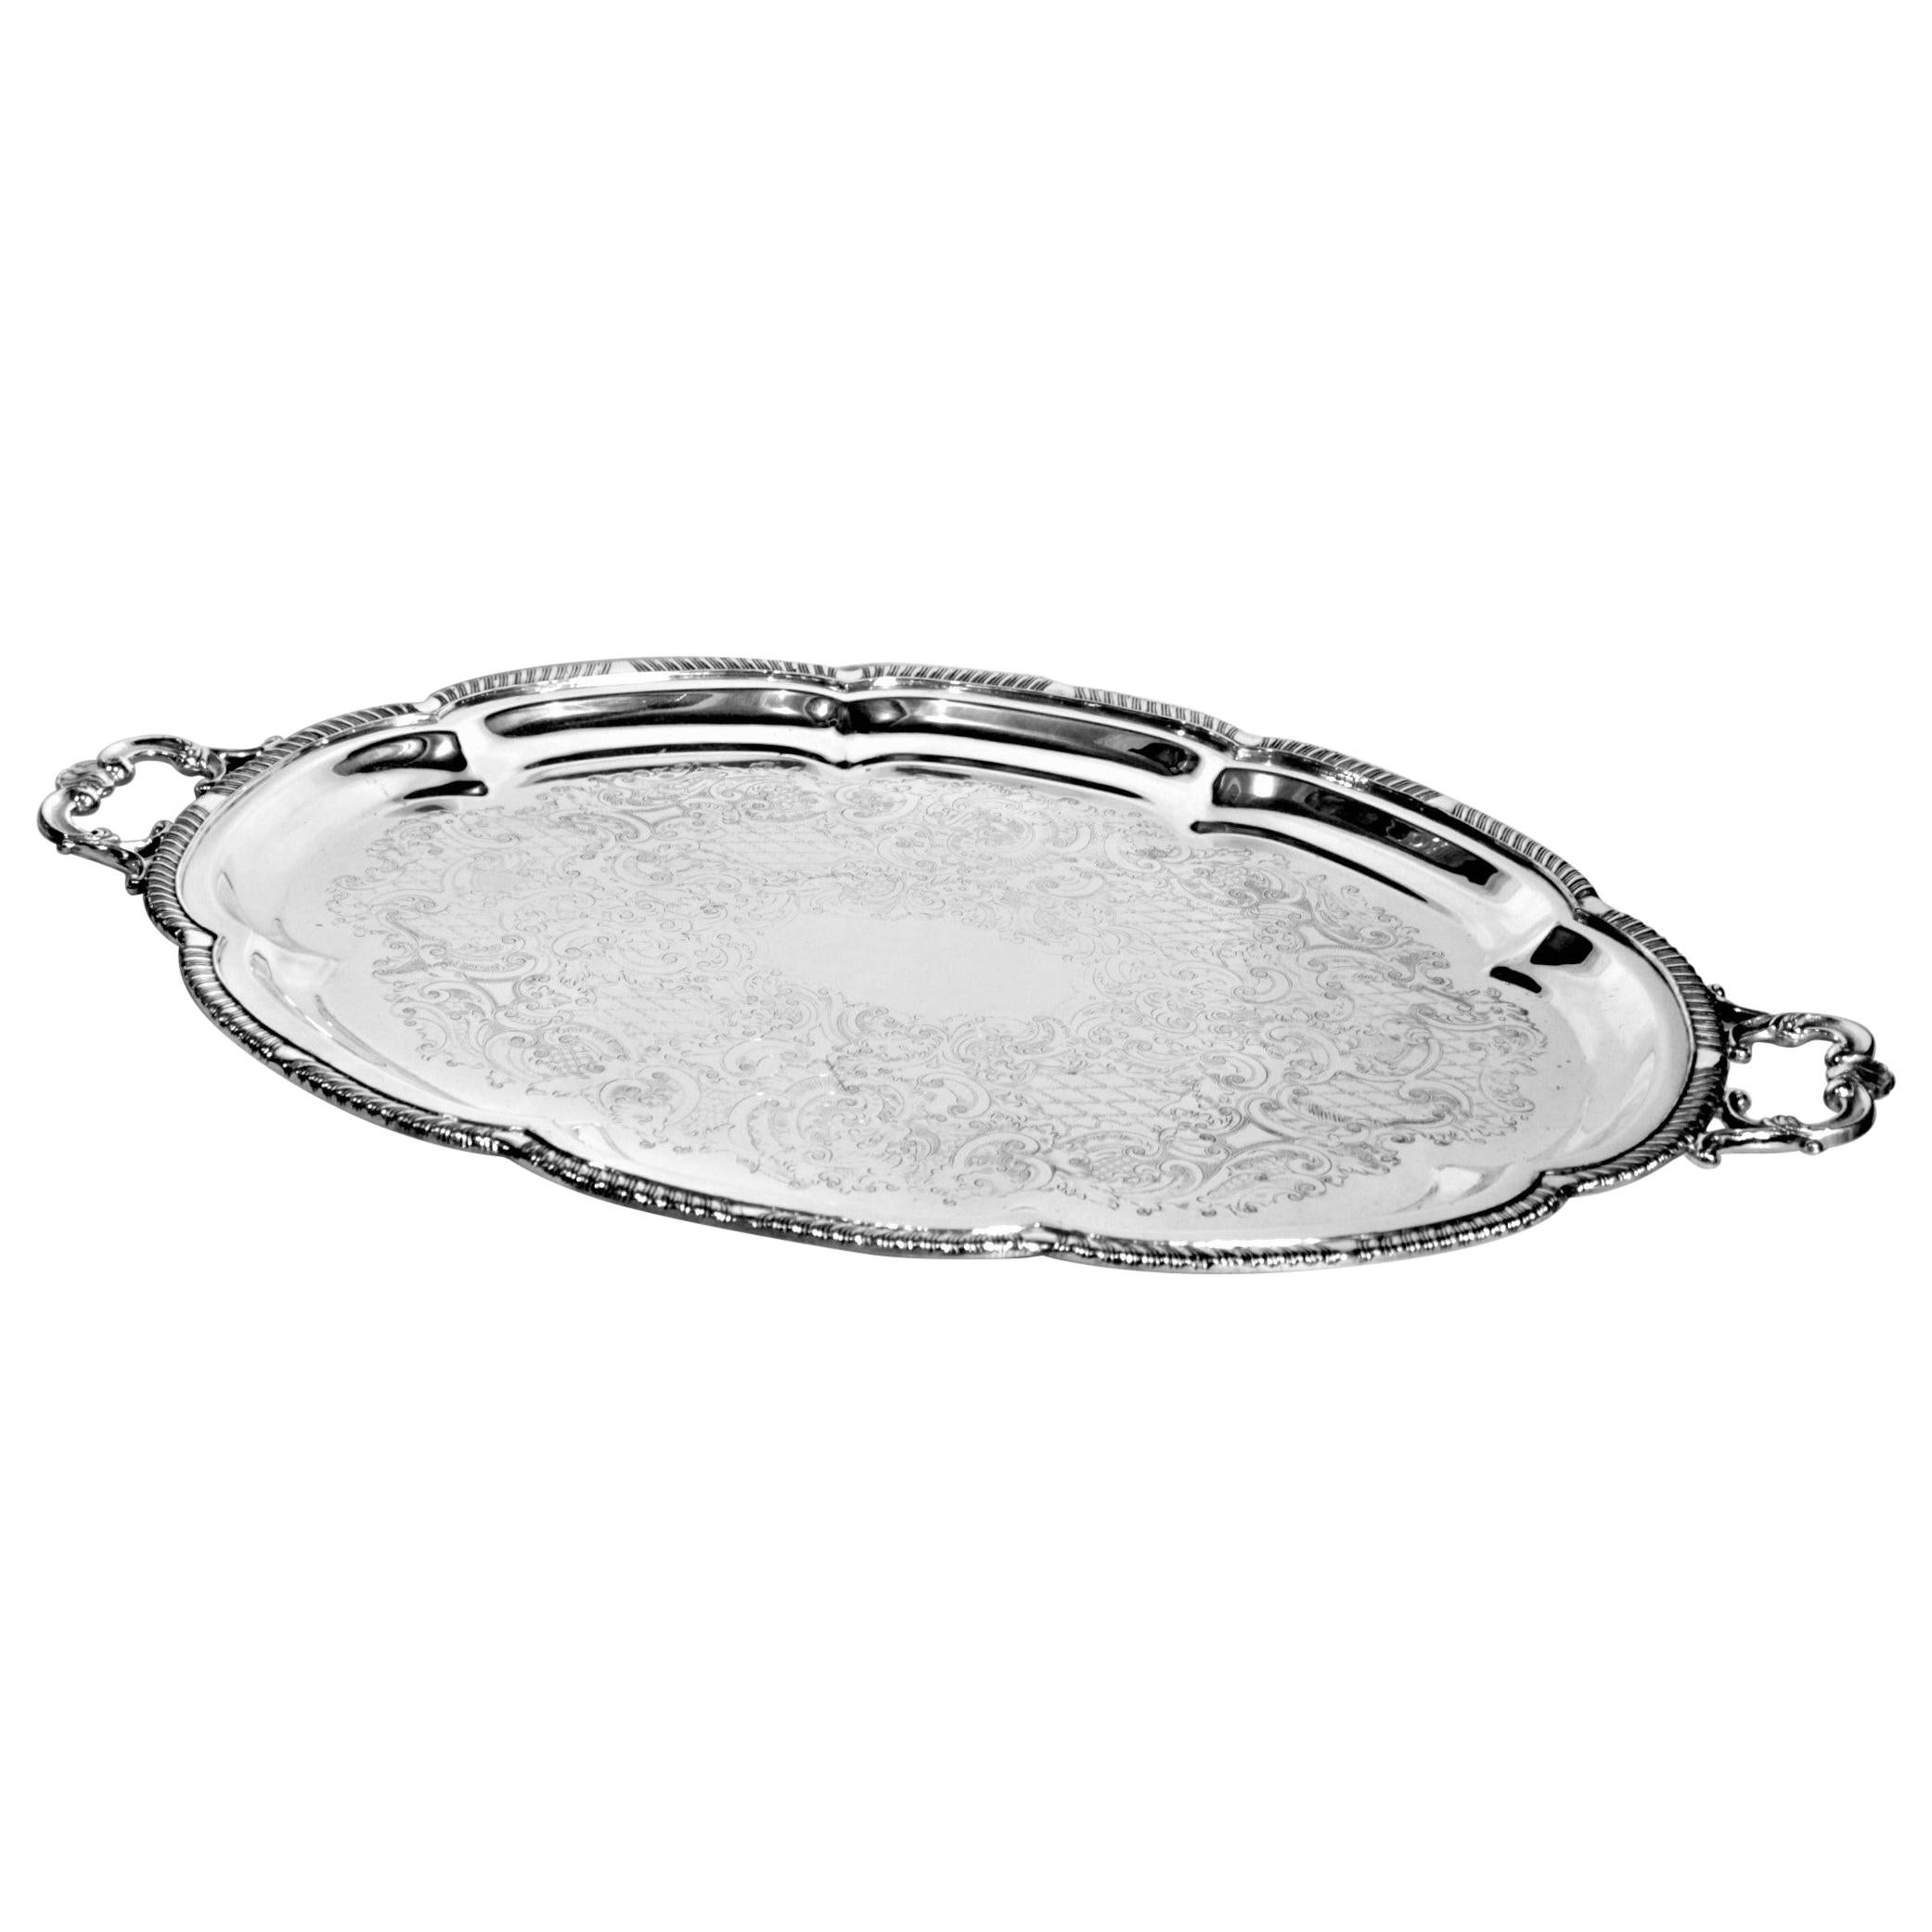 Antique Victorian Styled Scalloped Oval Silver Plated Engraved Serving Tray For Sale